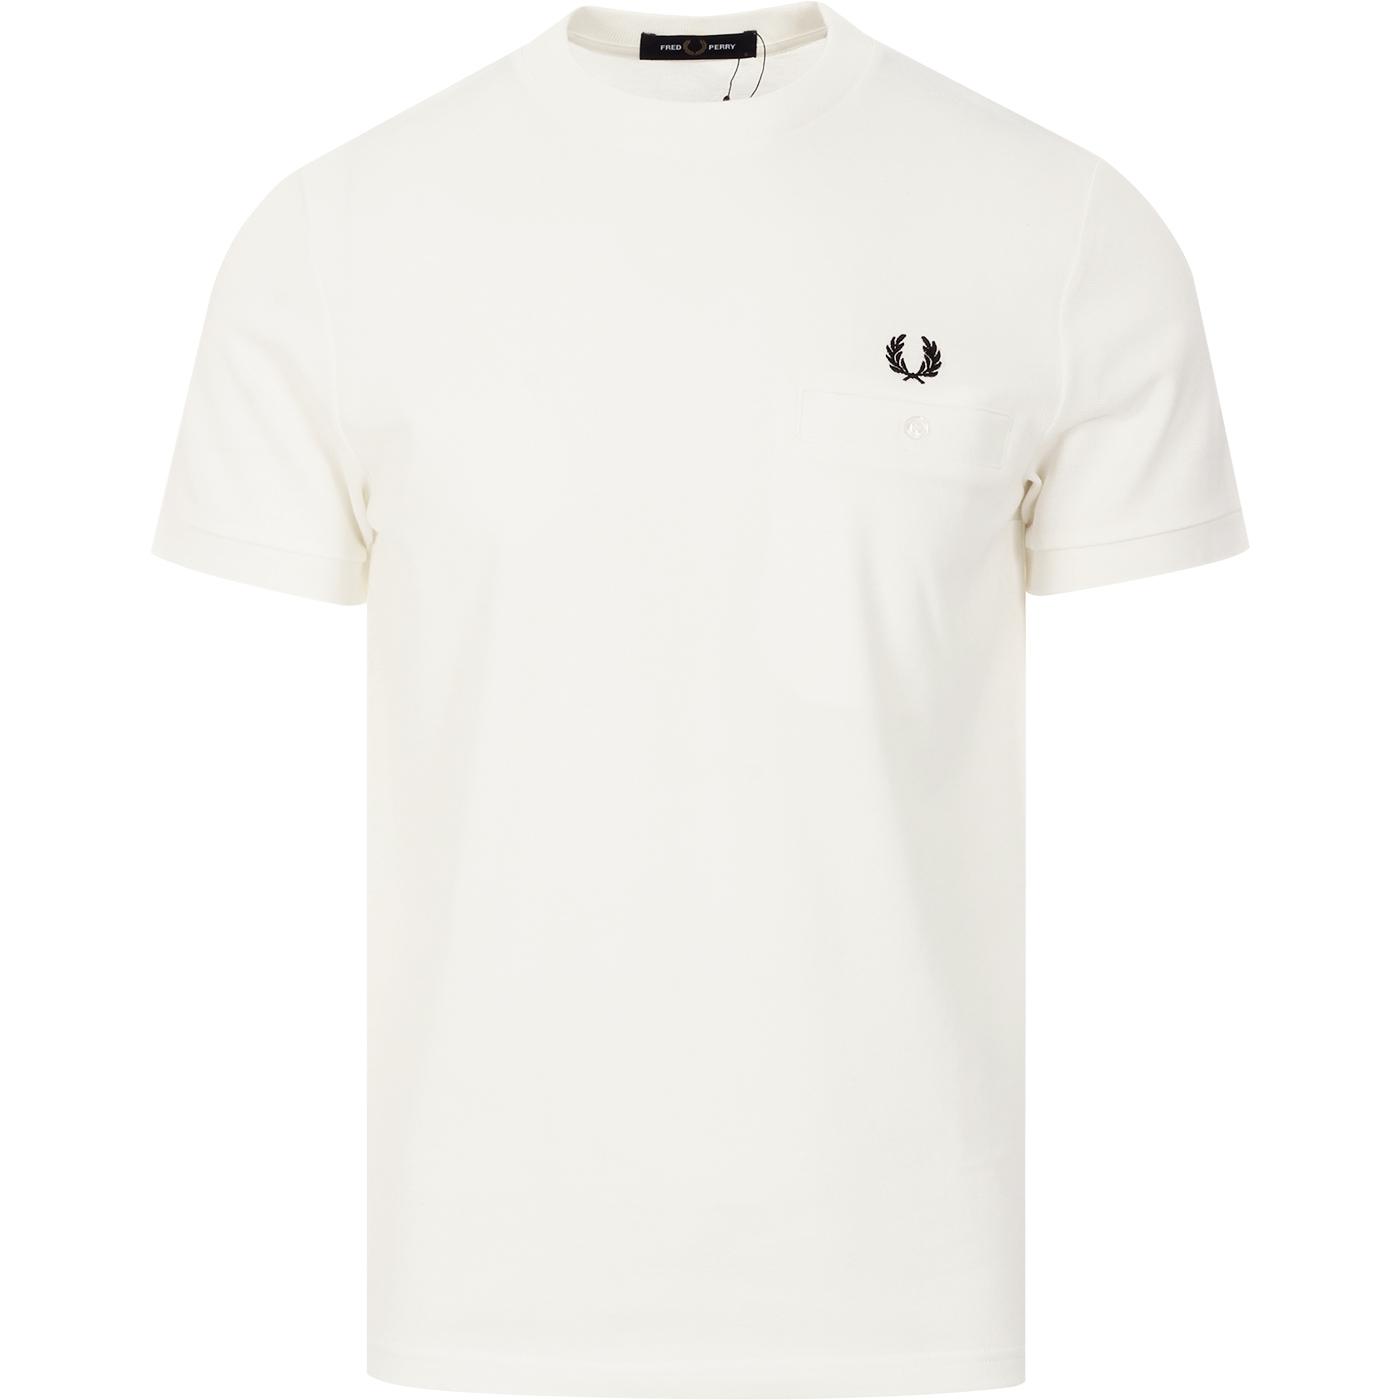 FRED PERRY Retro Mod Pocket Detail Pique Tee (SW)